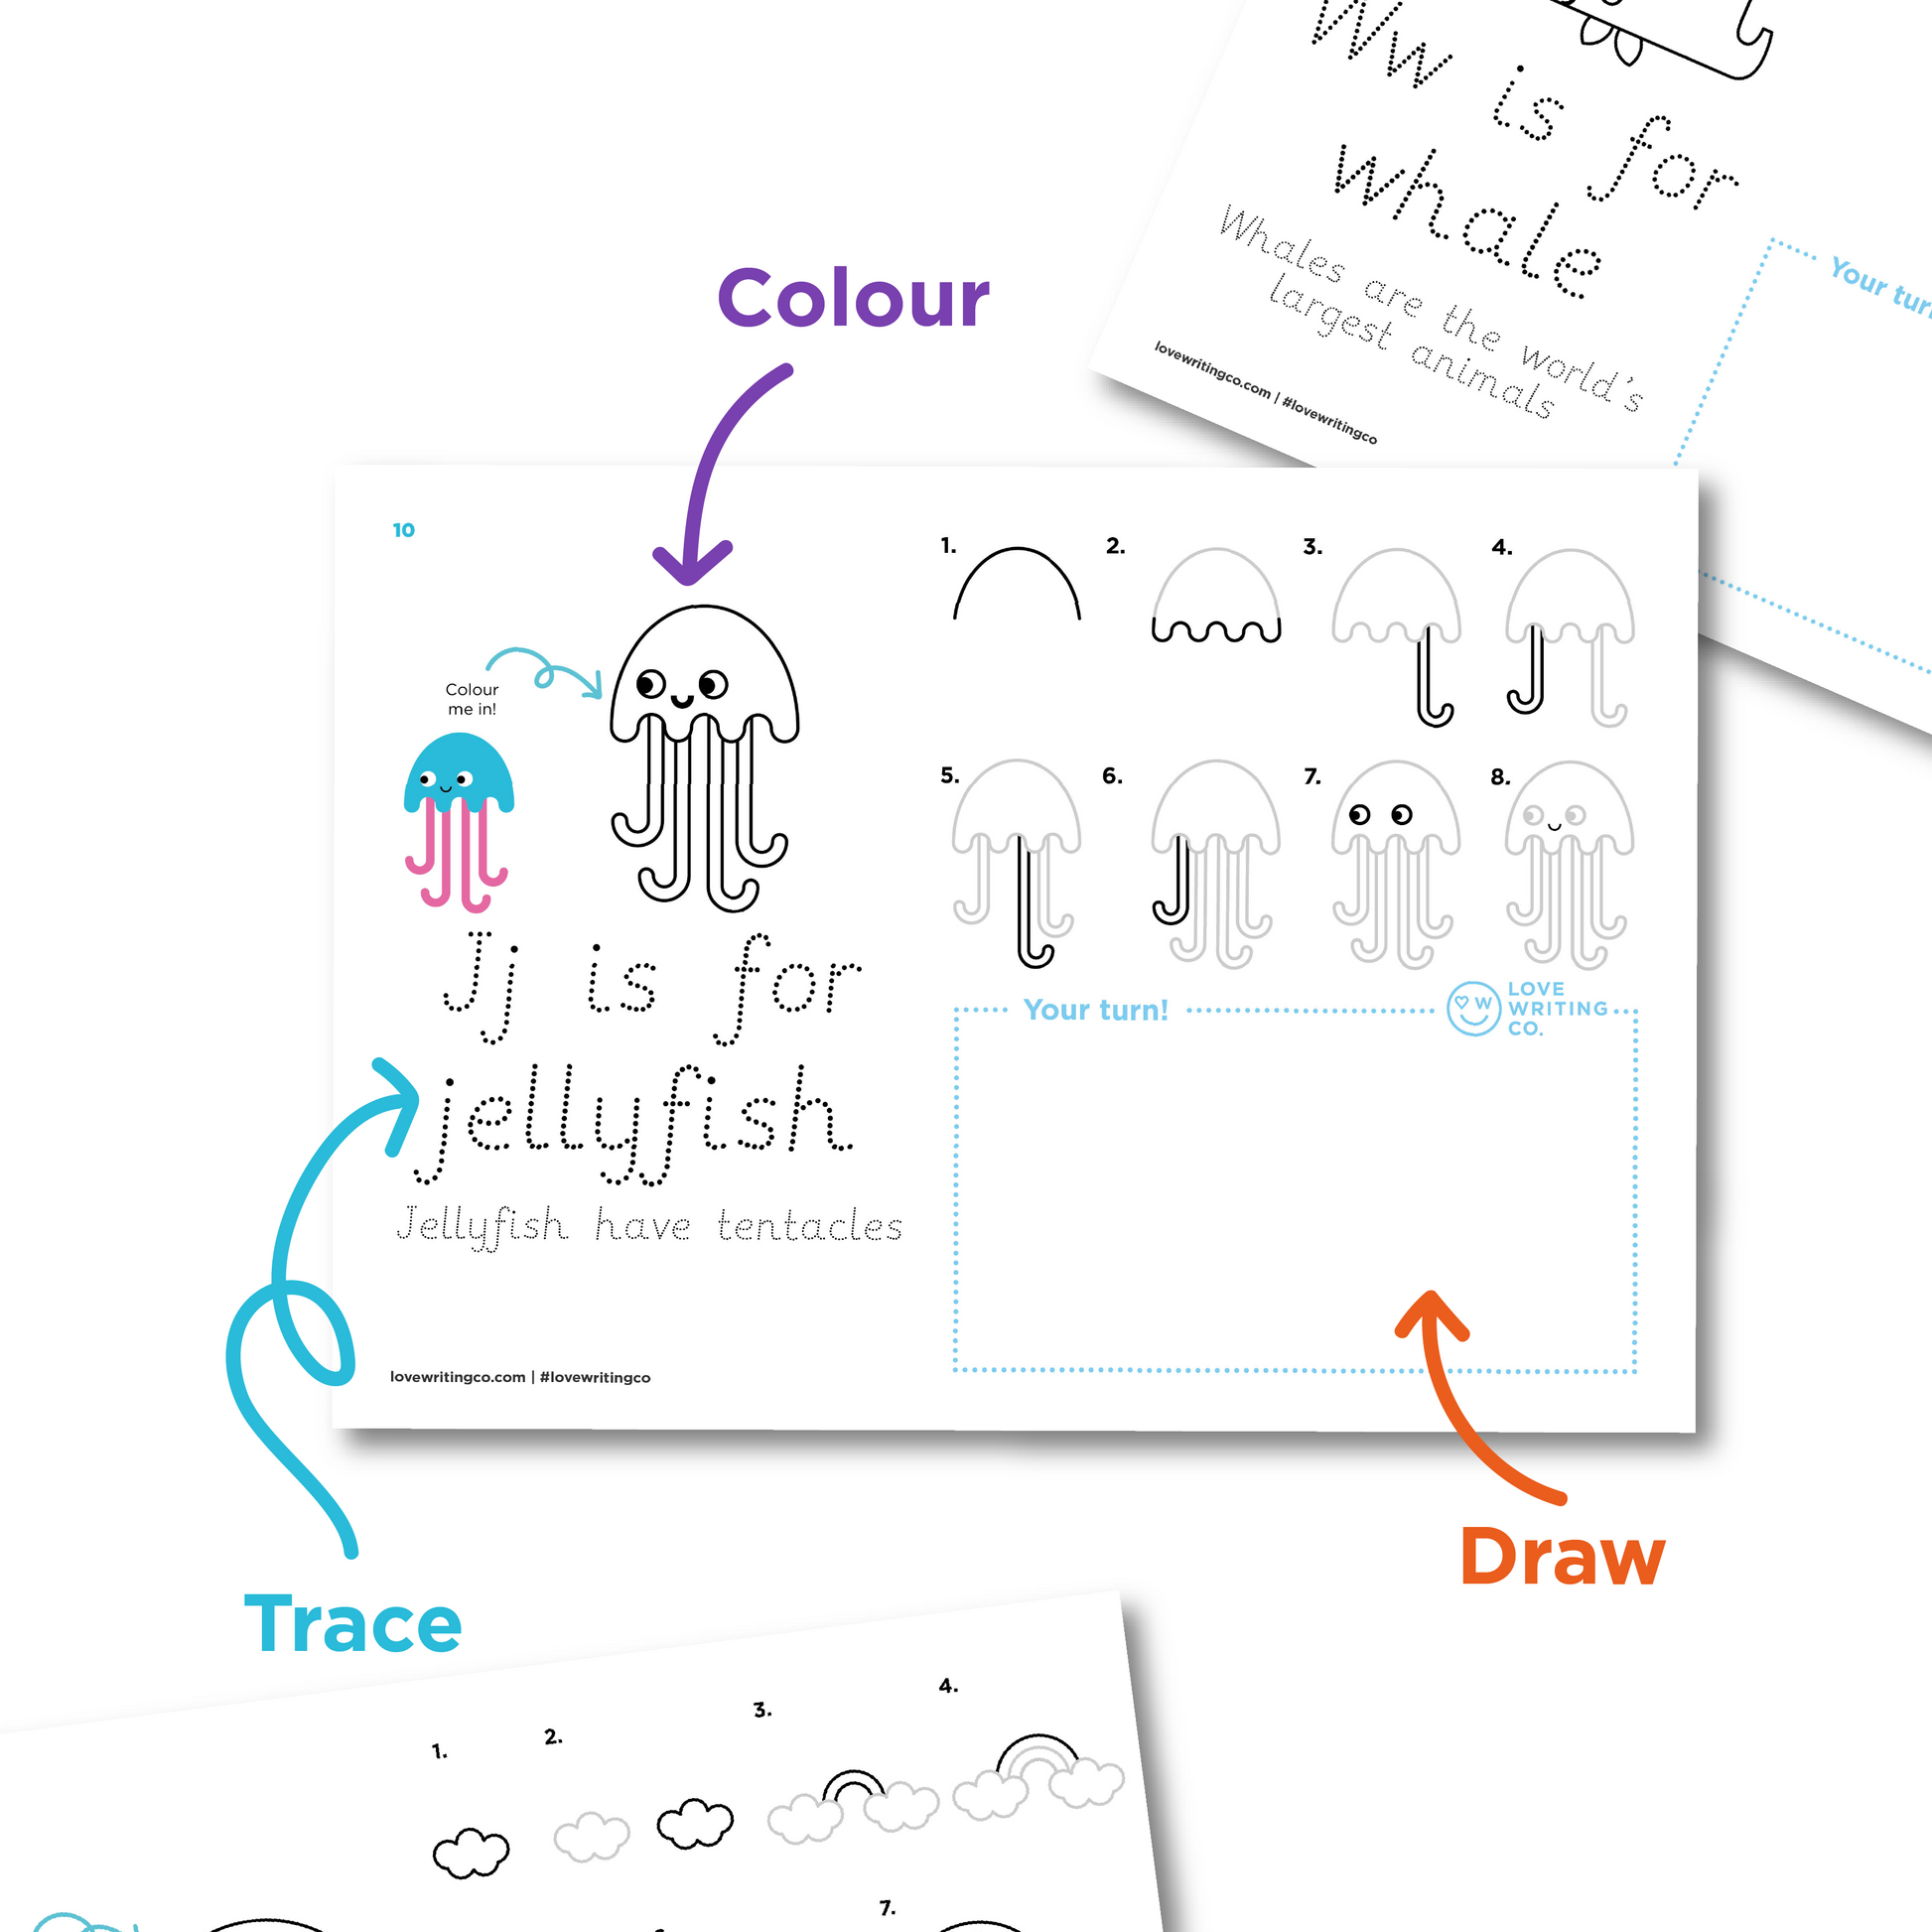 Colour, trace and draw activities